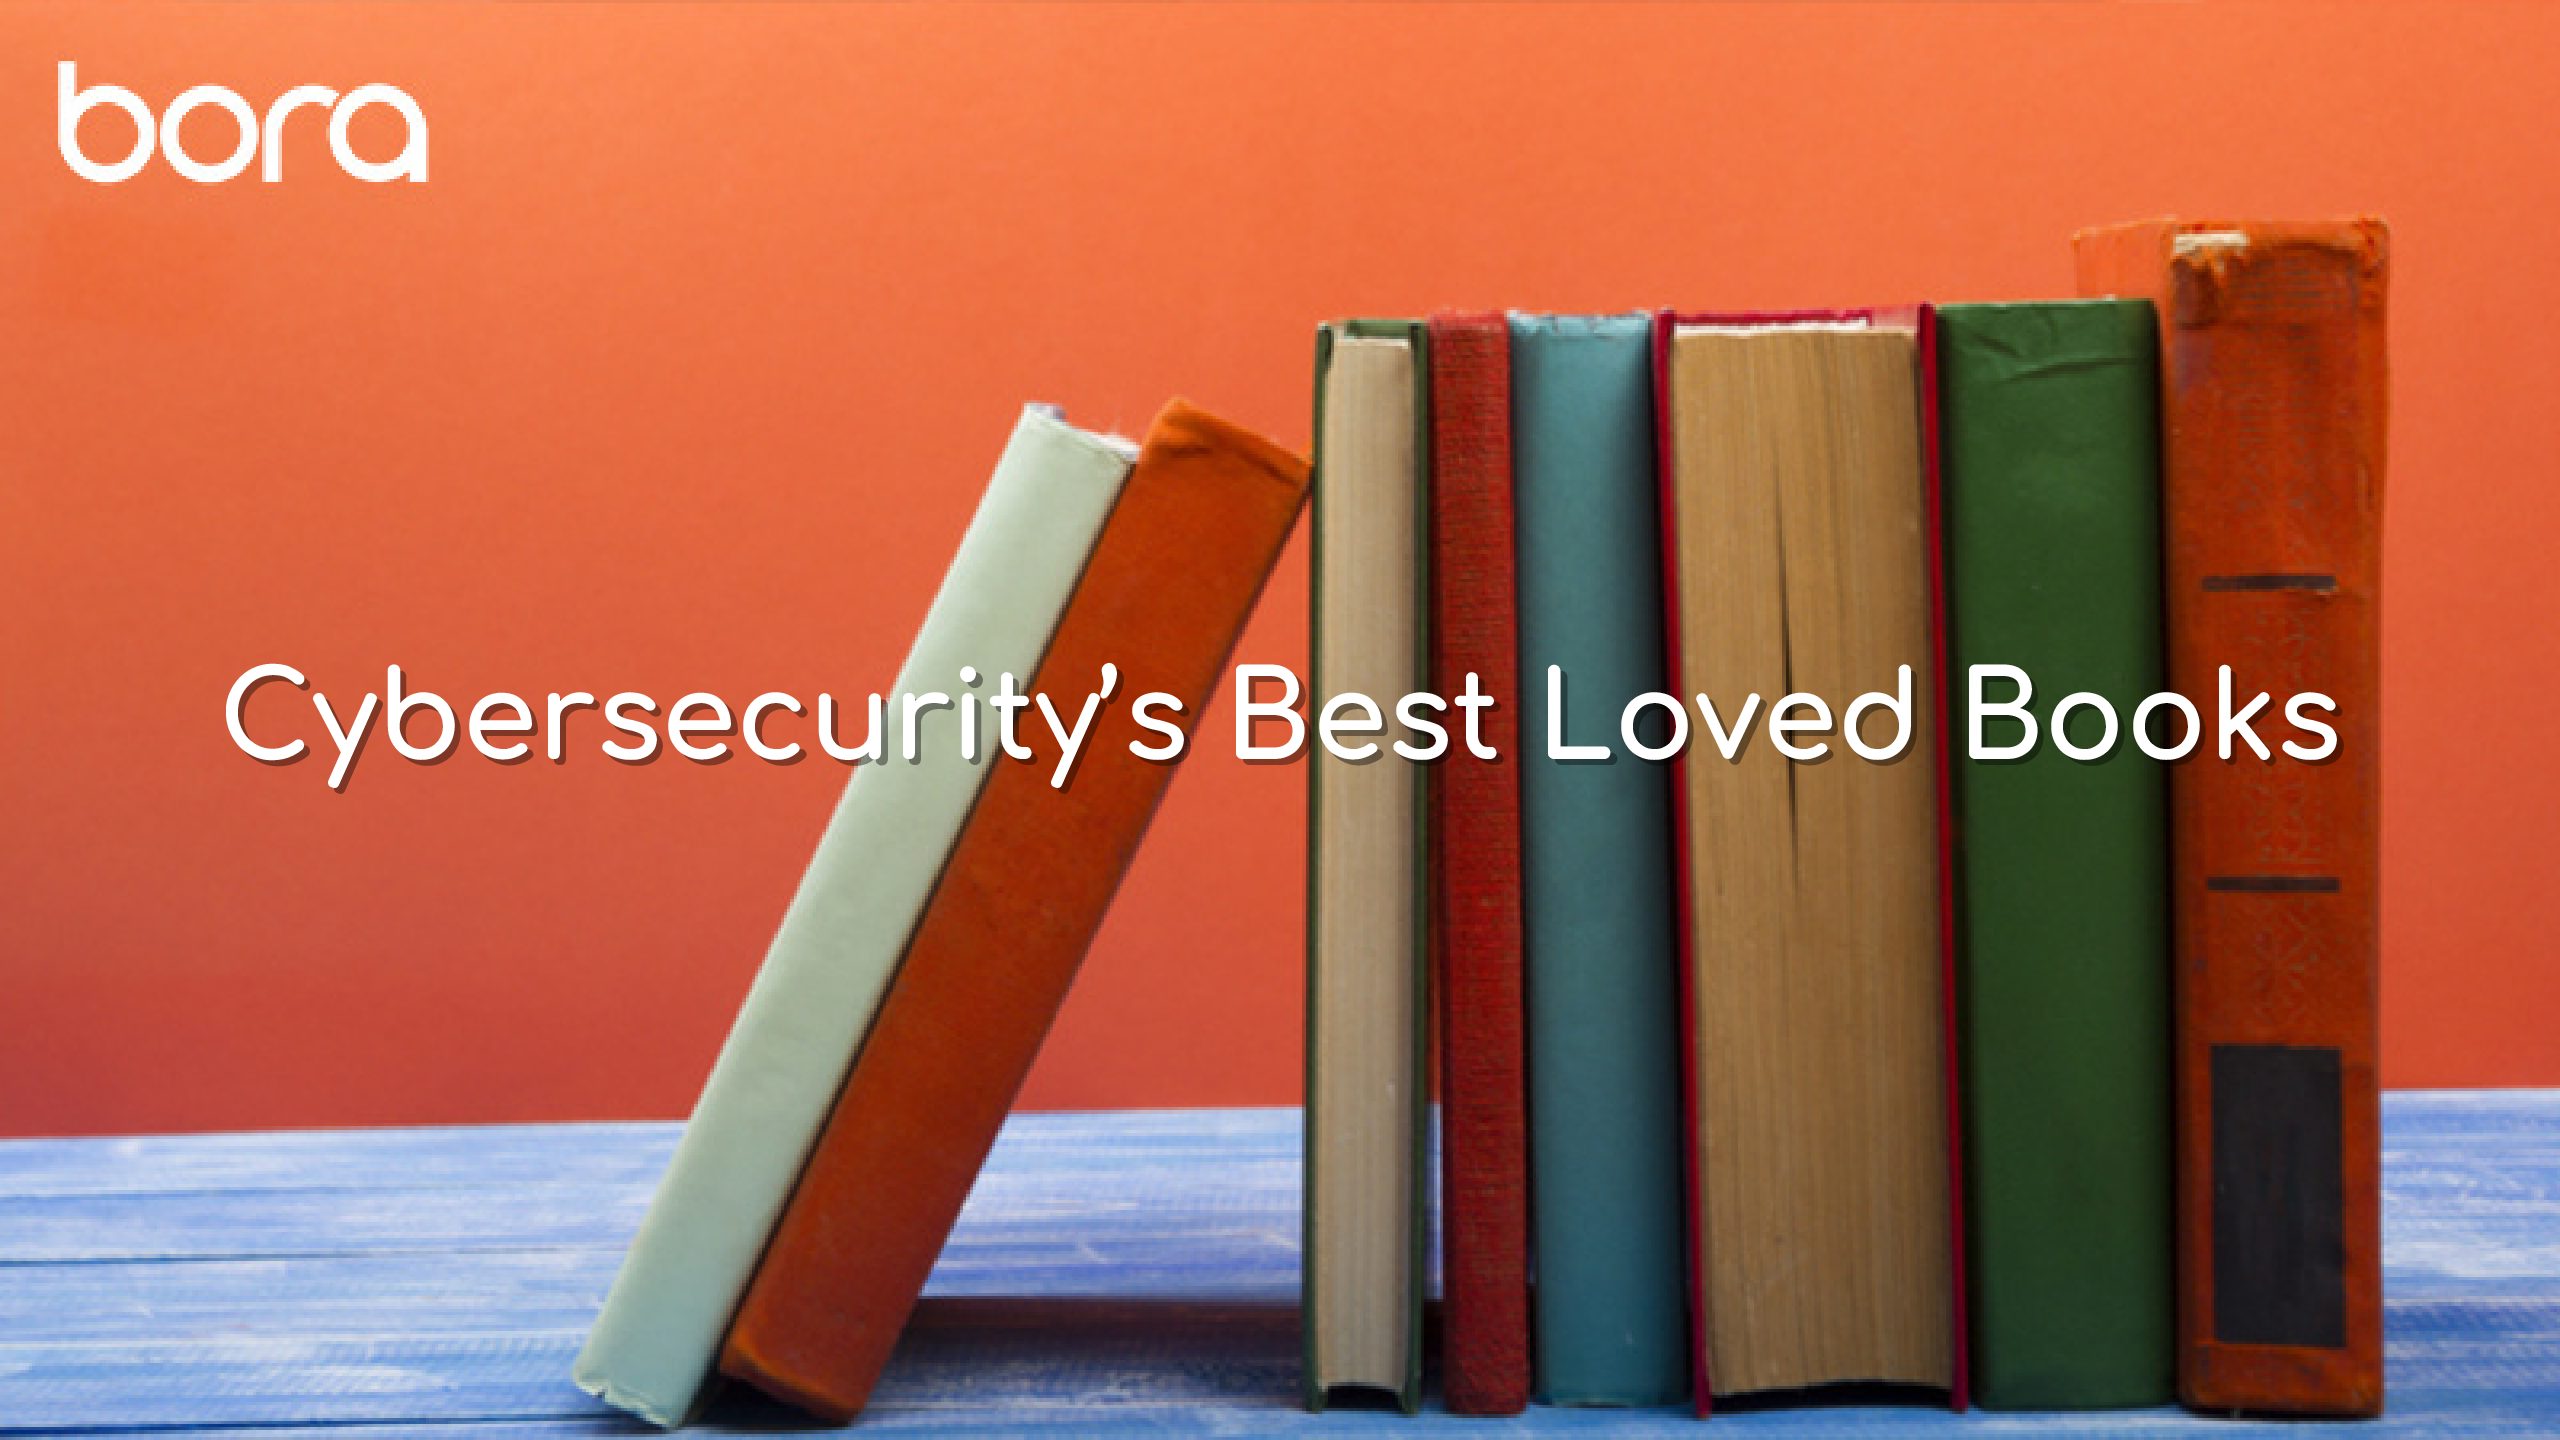 Cybersecurity’s Best Loved Books